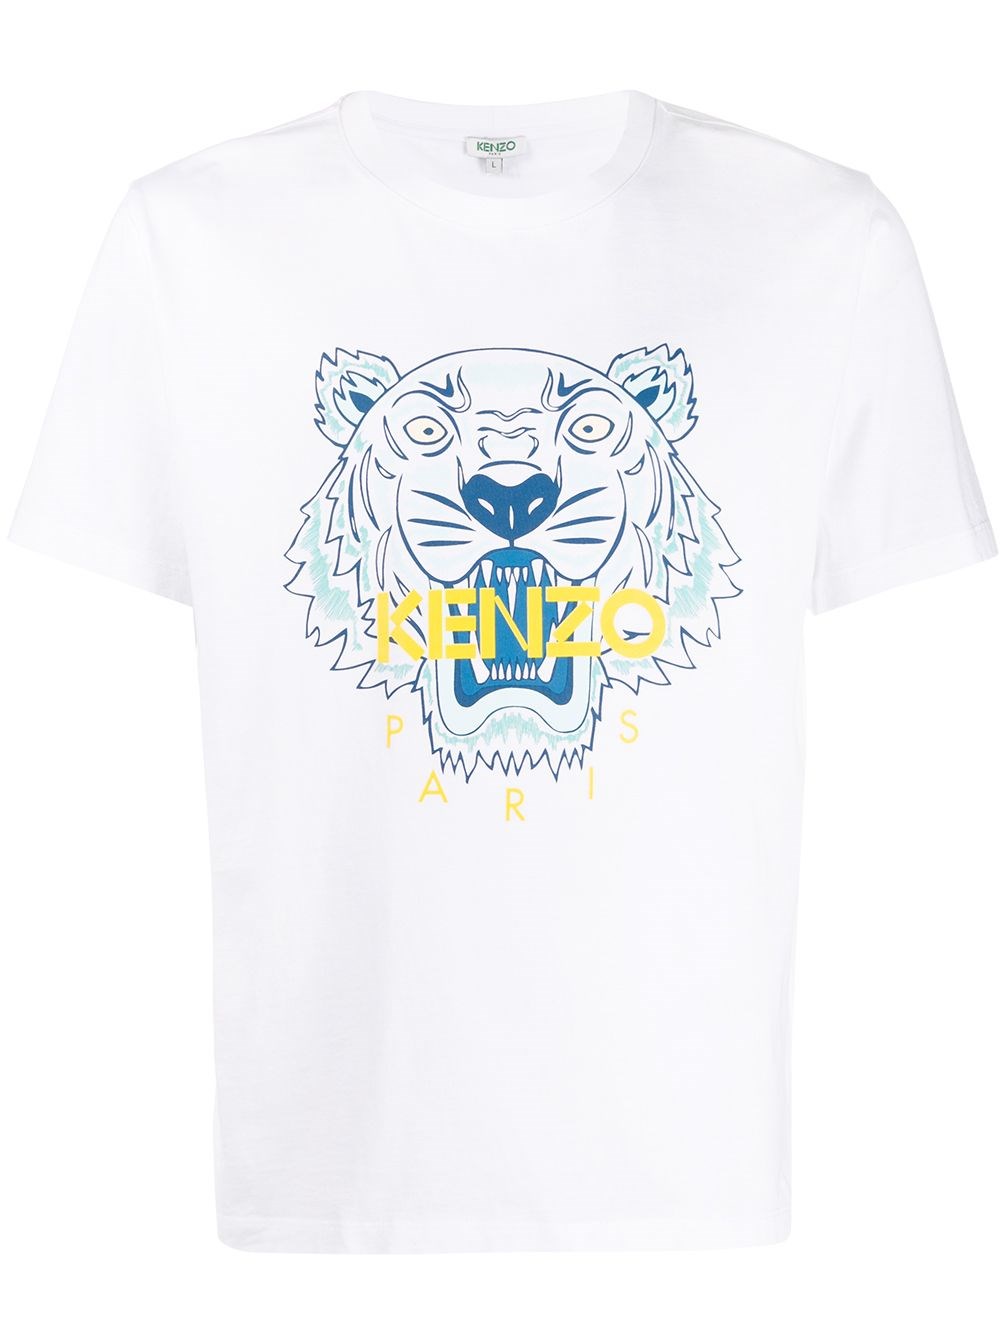 Kenzo Logo Shirt Top Sellers, 46% OFF | www.ilpungolo.org